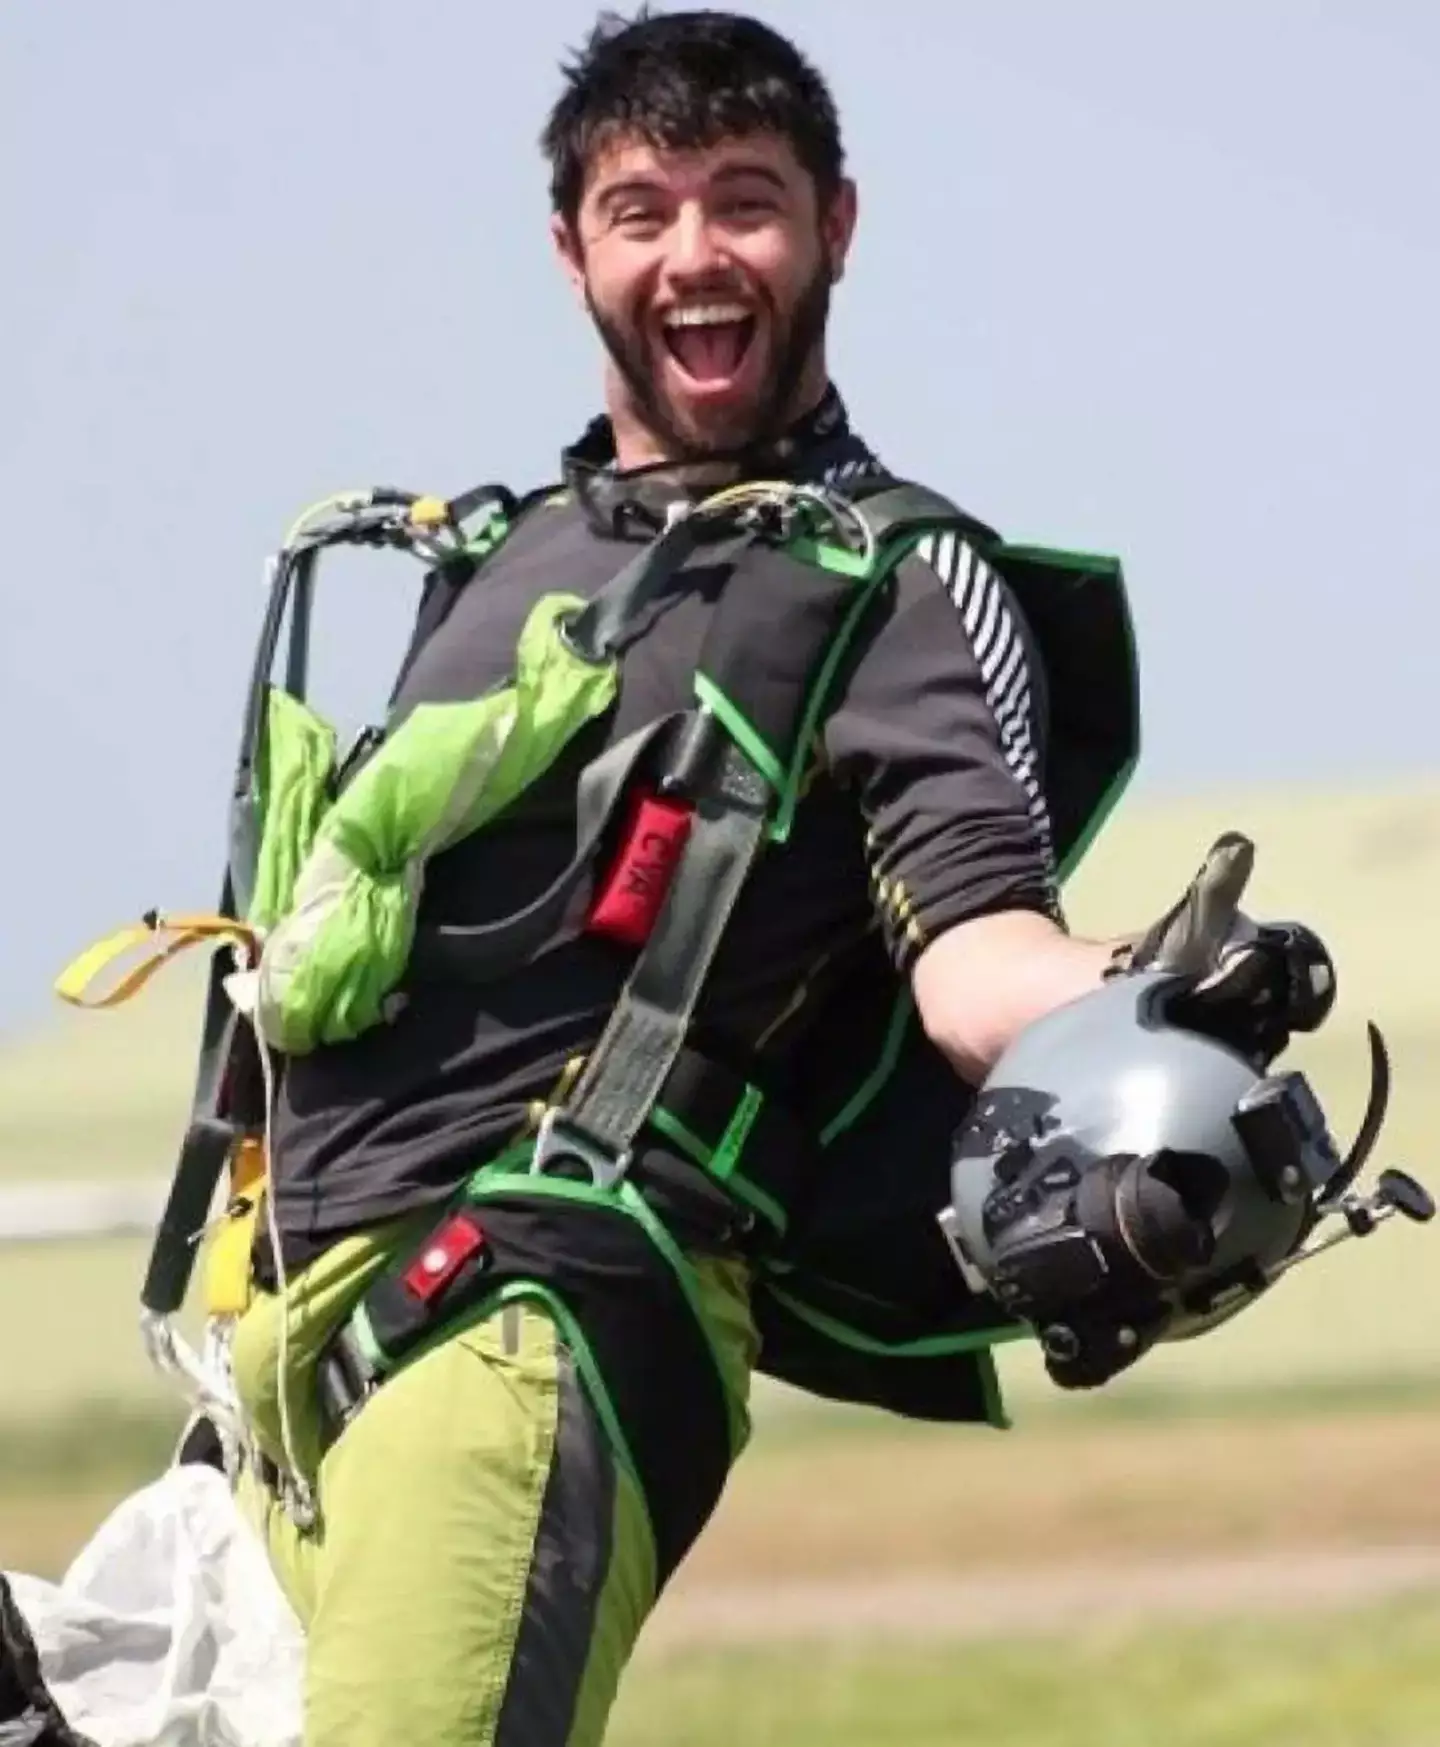 Dylan Roberts tragically died in a base jumping accident.